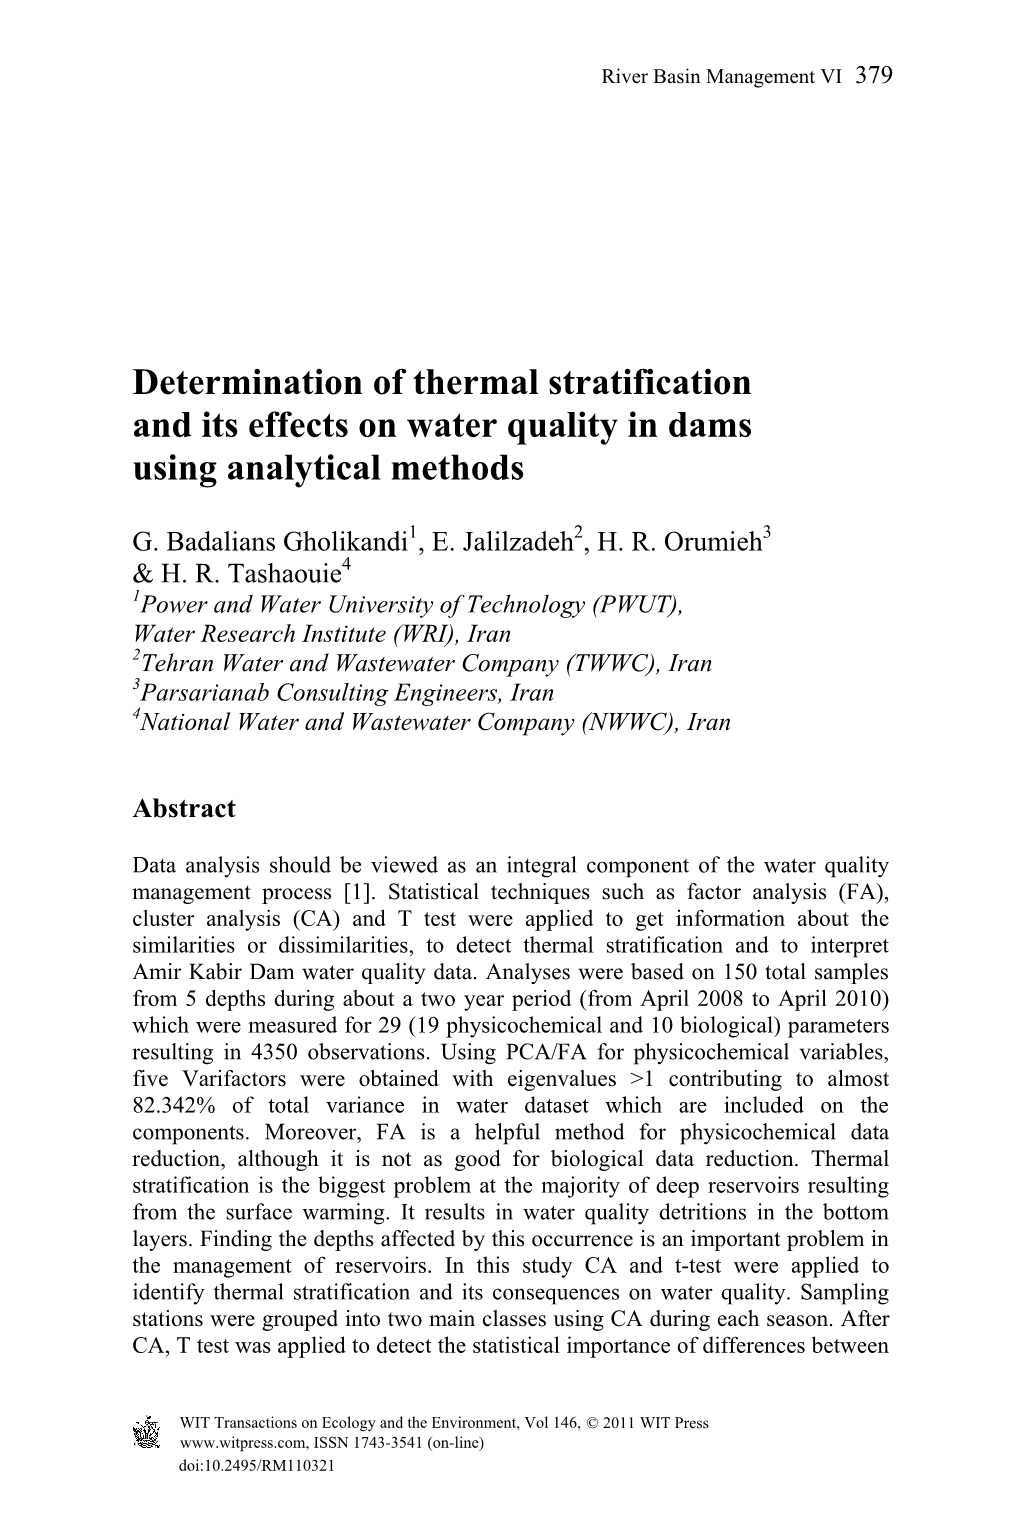 Determination of Thermal Stratification and Its Effects on Water Quality in Dams Using Analytical Methods